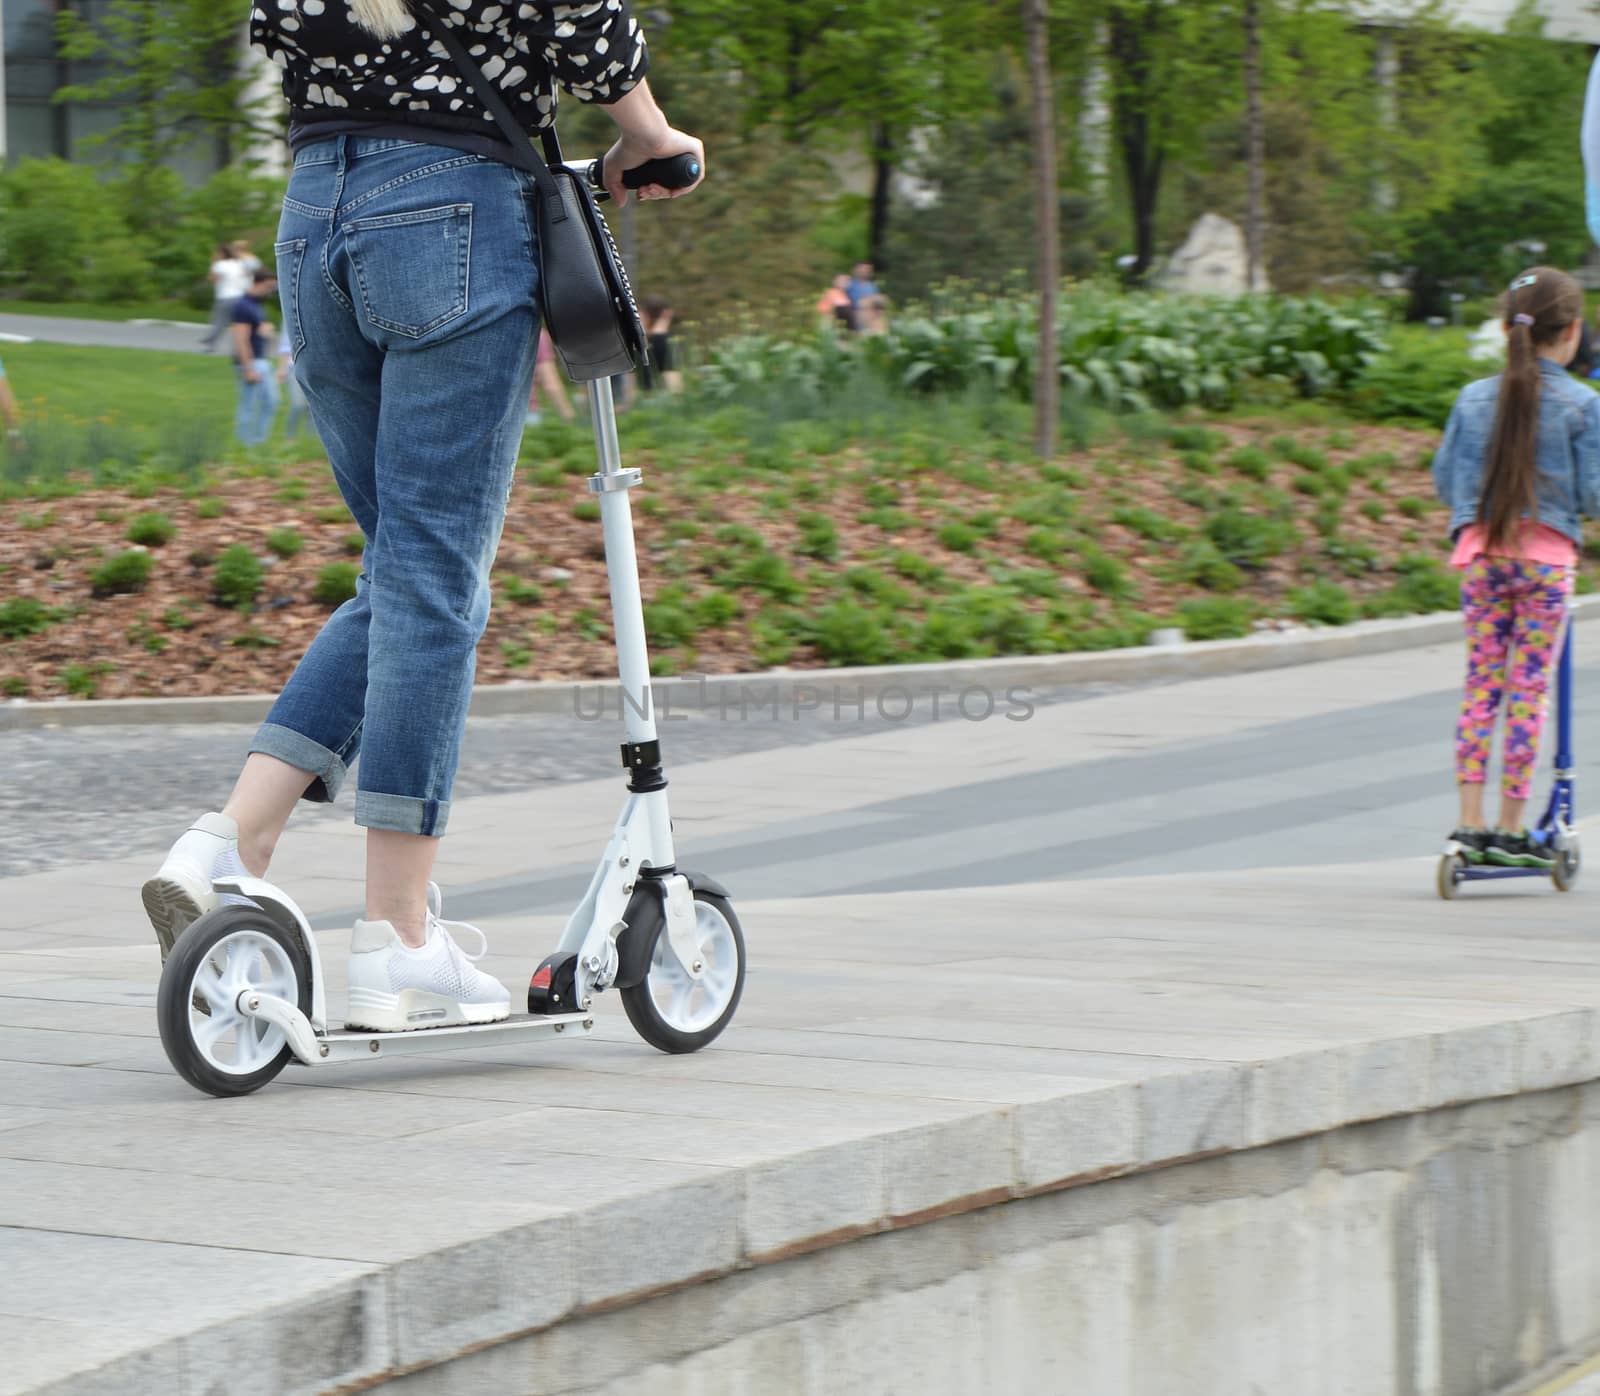 woman and her daughter ride together outdoors in the Park on the scooter.